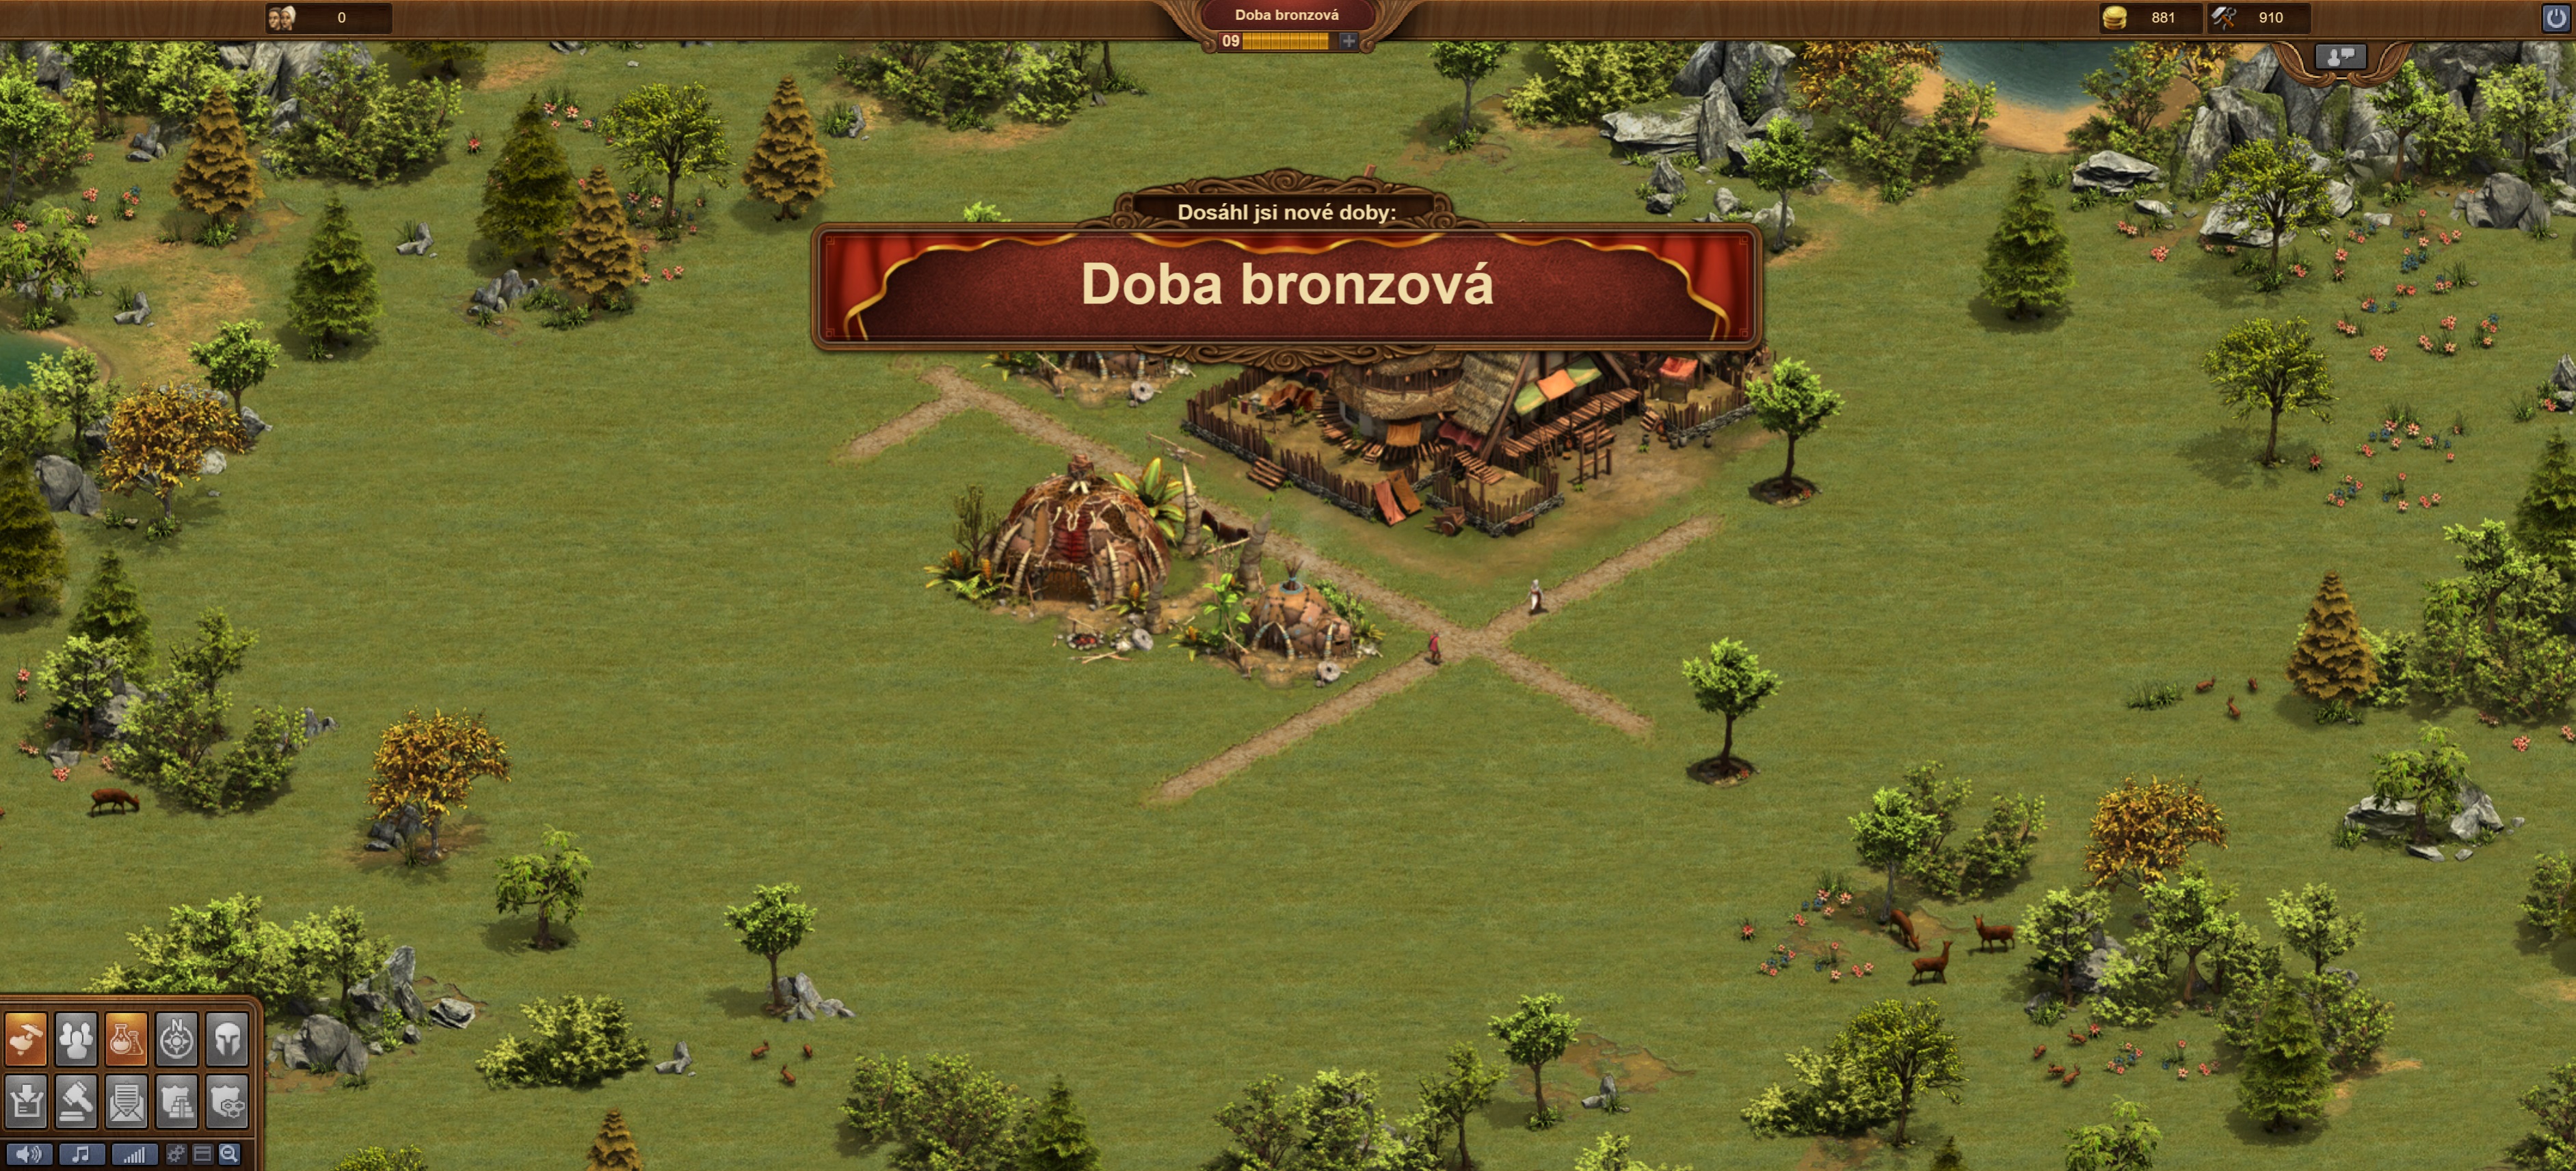 forge of empires how to prevent plundering